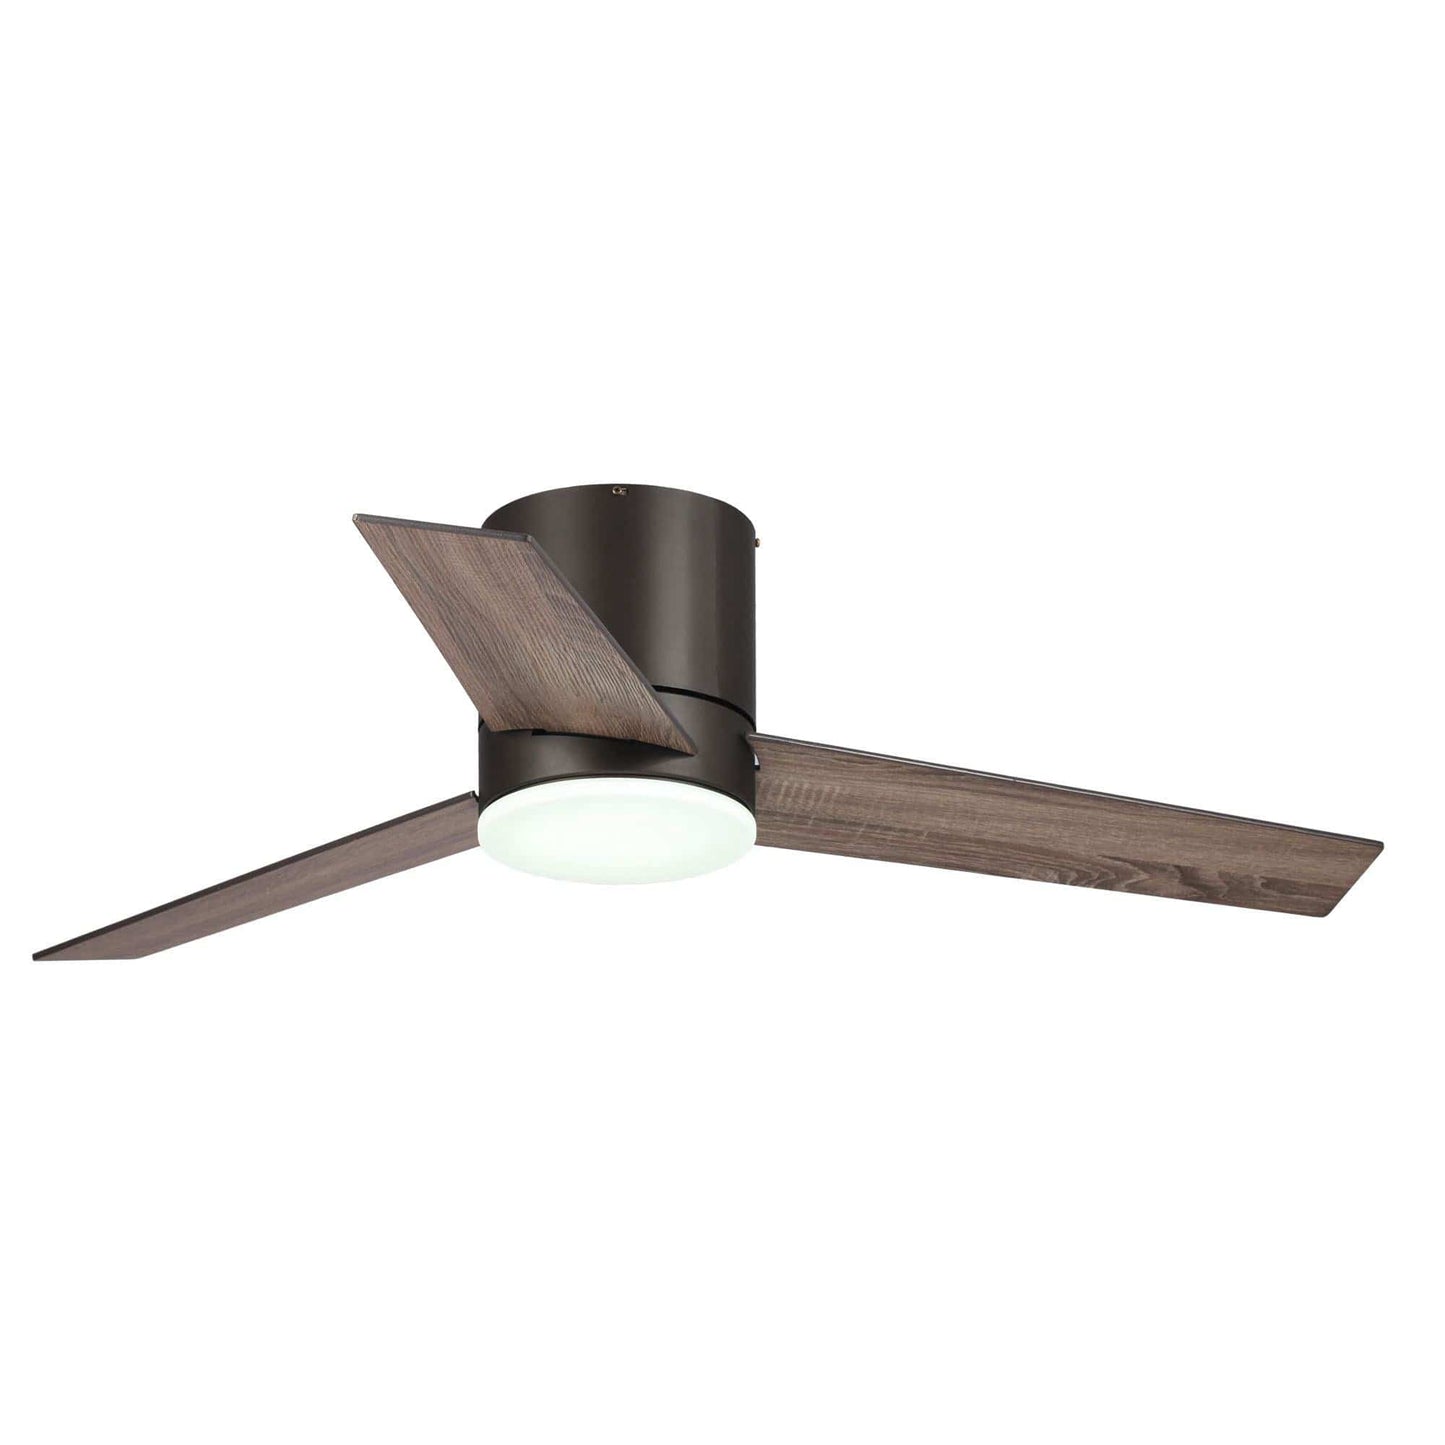 Parrot Uncle 48" Kielah Traditional Flush Mount Reversible Ceiling Fan with Lighting and Remote Control